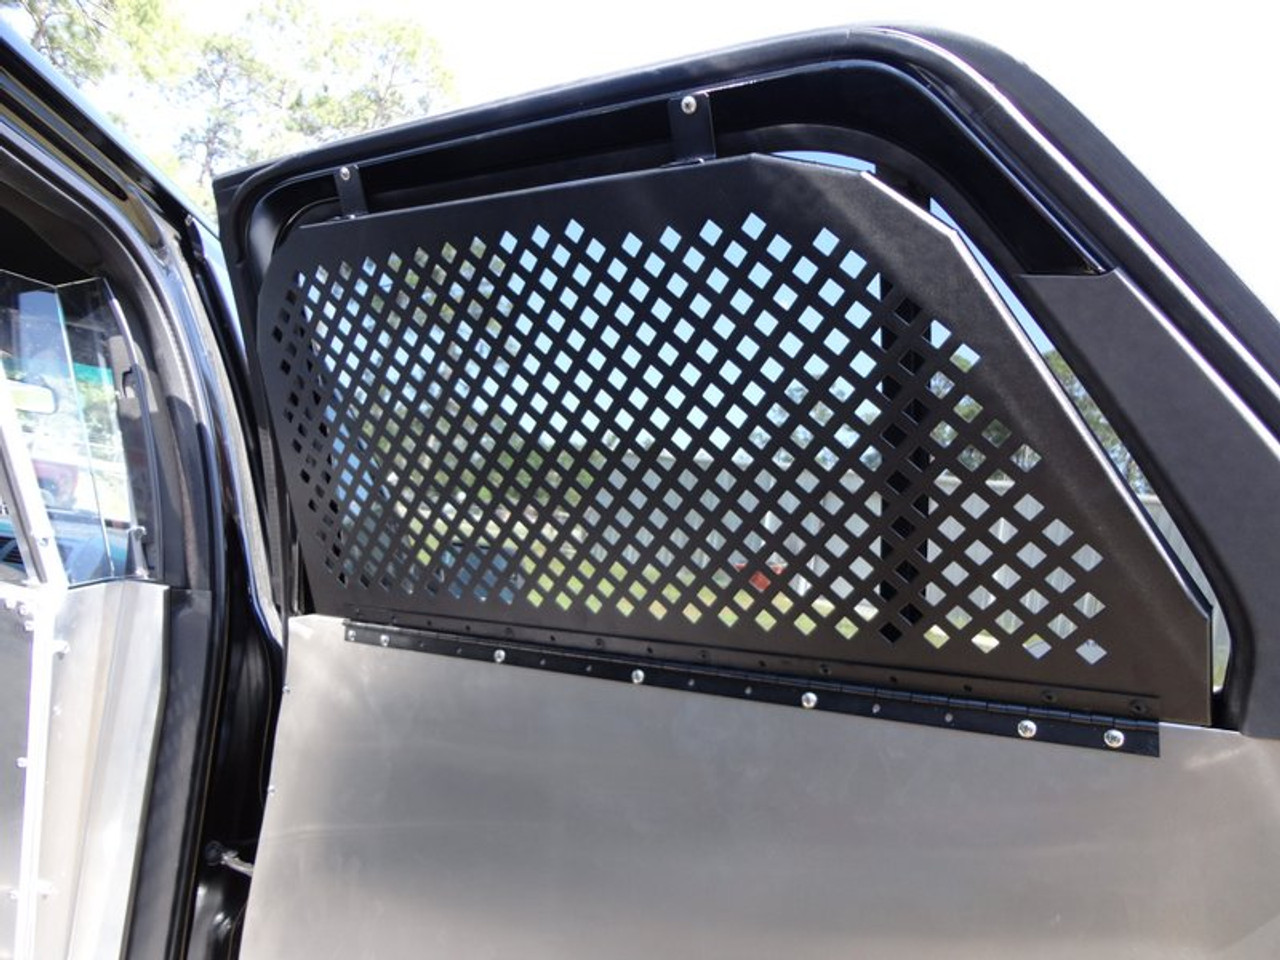 American Aluminum Ford Interceptor Utility SUV EZ Rider K9 Law Enforcement Dog Vehicle Kennel Transport System, Insert, Black or Aluminum Finish, includes rubber mat, door panels, and window guards, 2013-2019